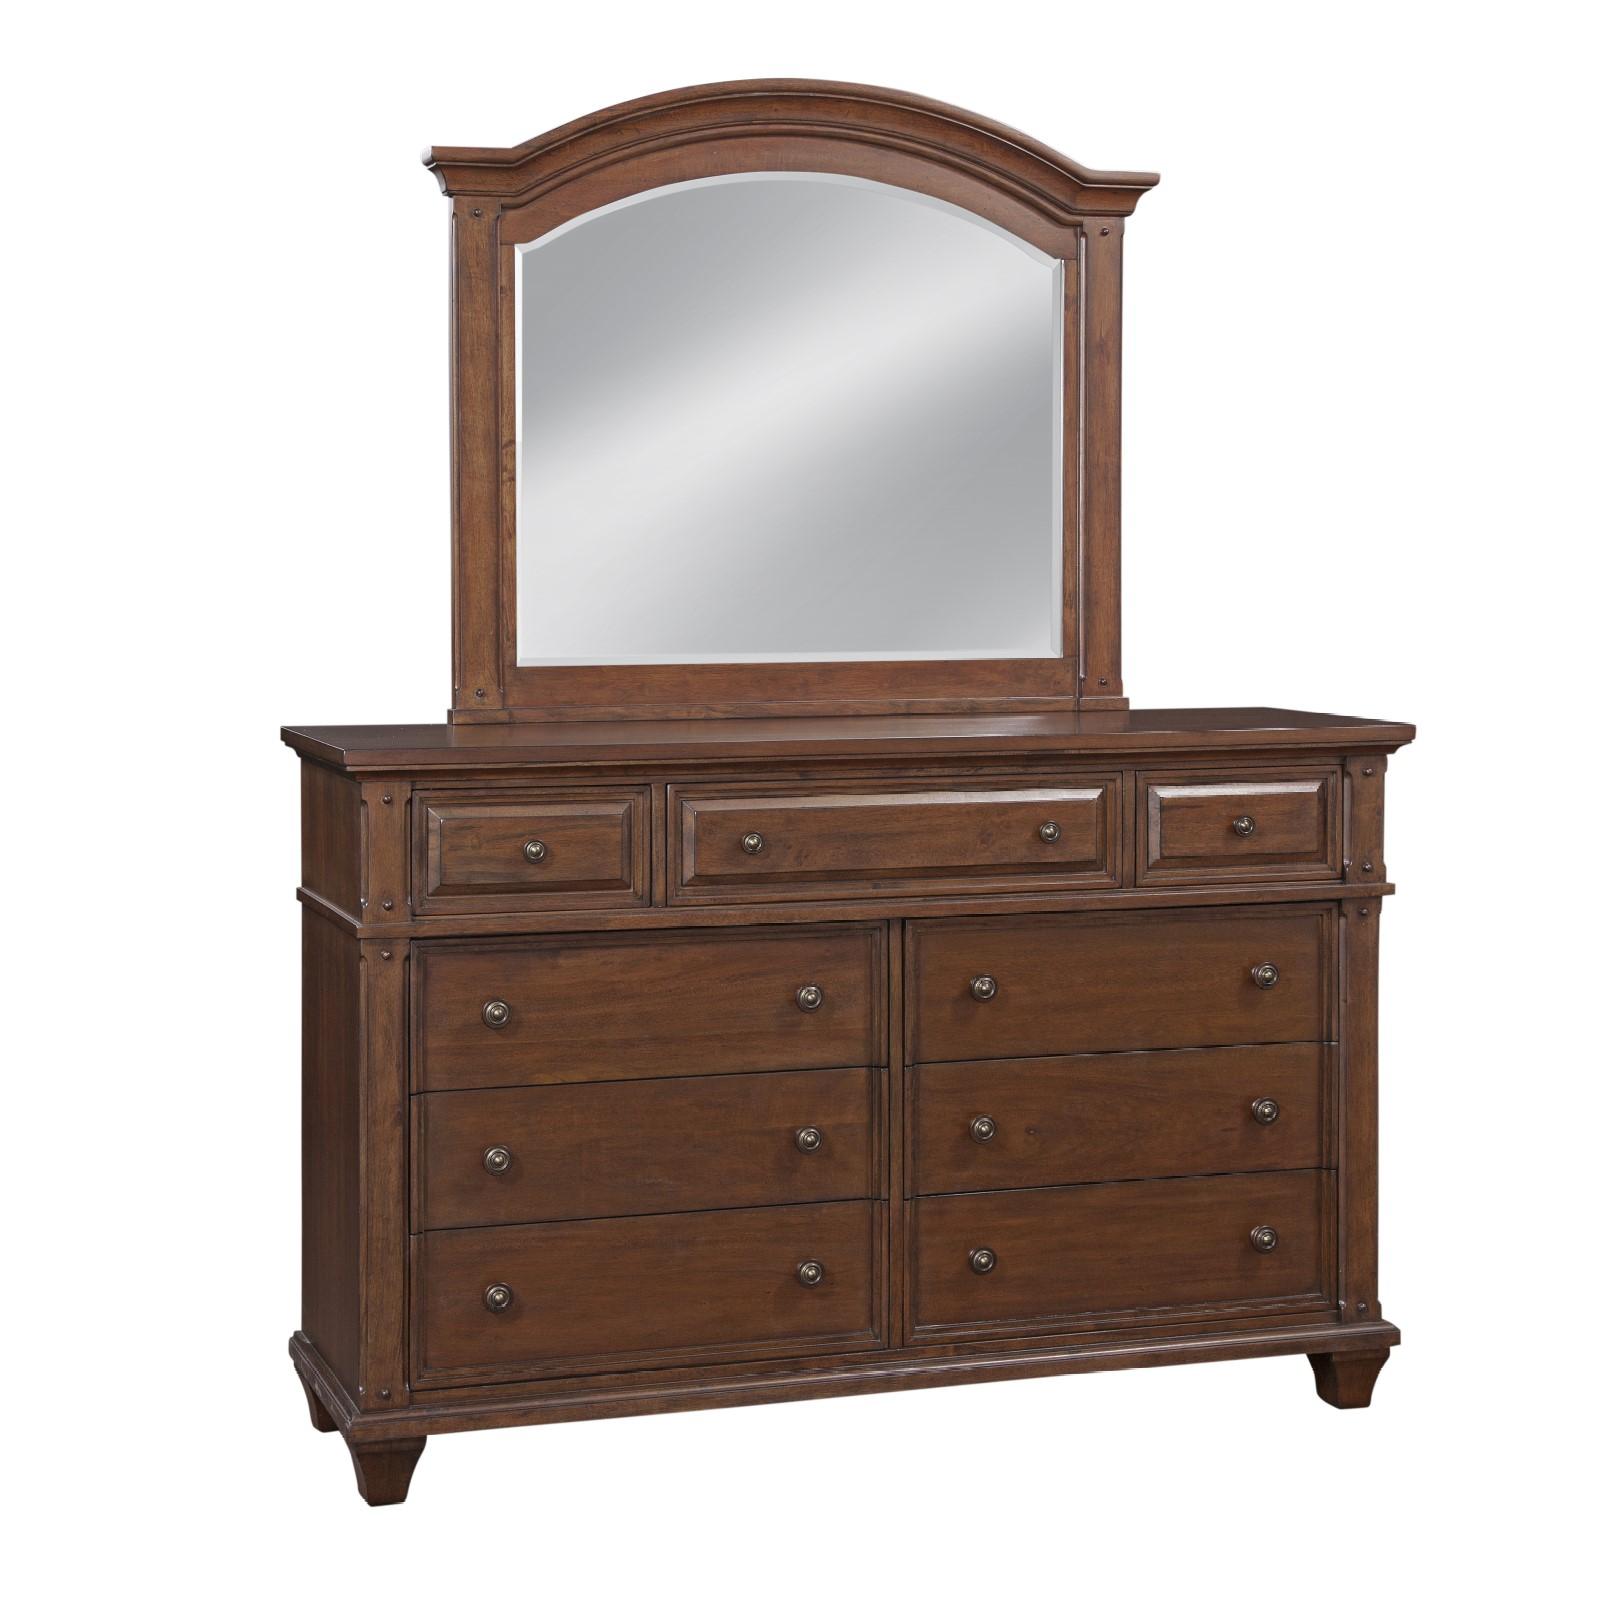 Classic, Traditional Dresser With Mirror SEDONA 2400-DLM 2400-DLM in Cherry 